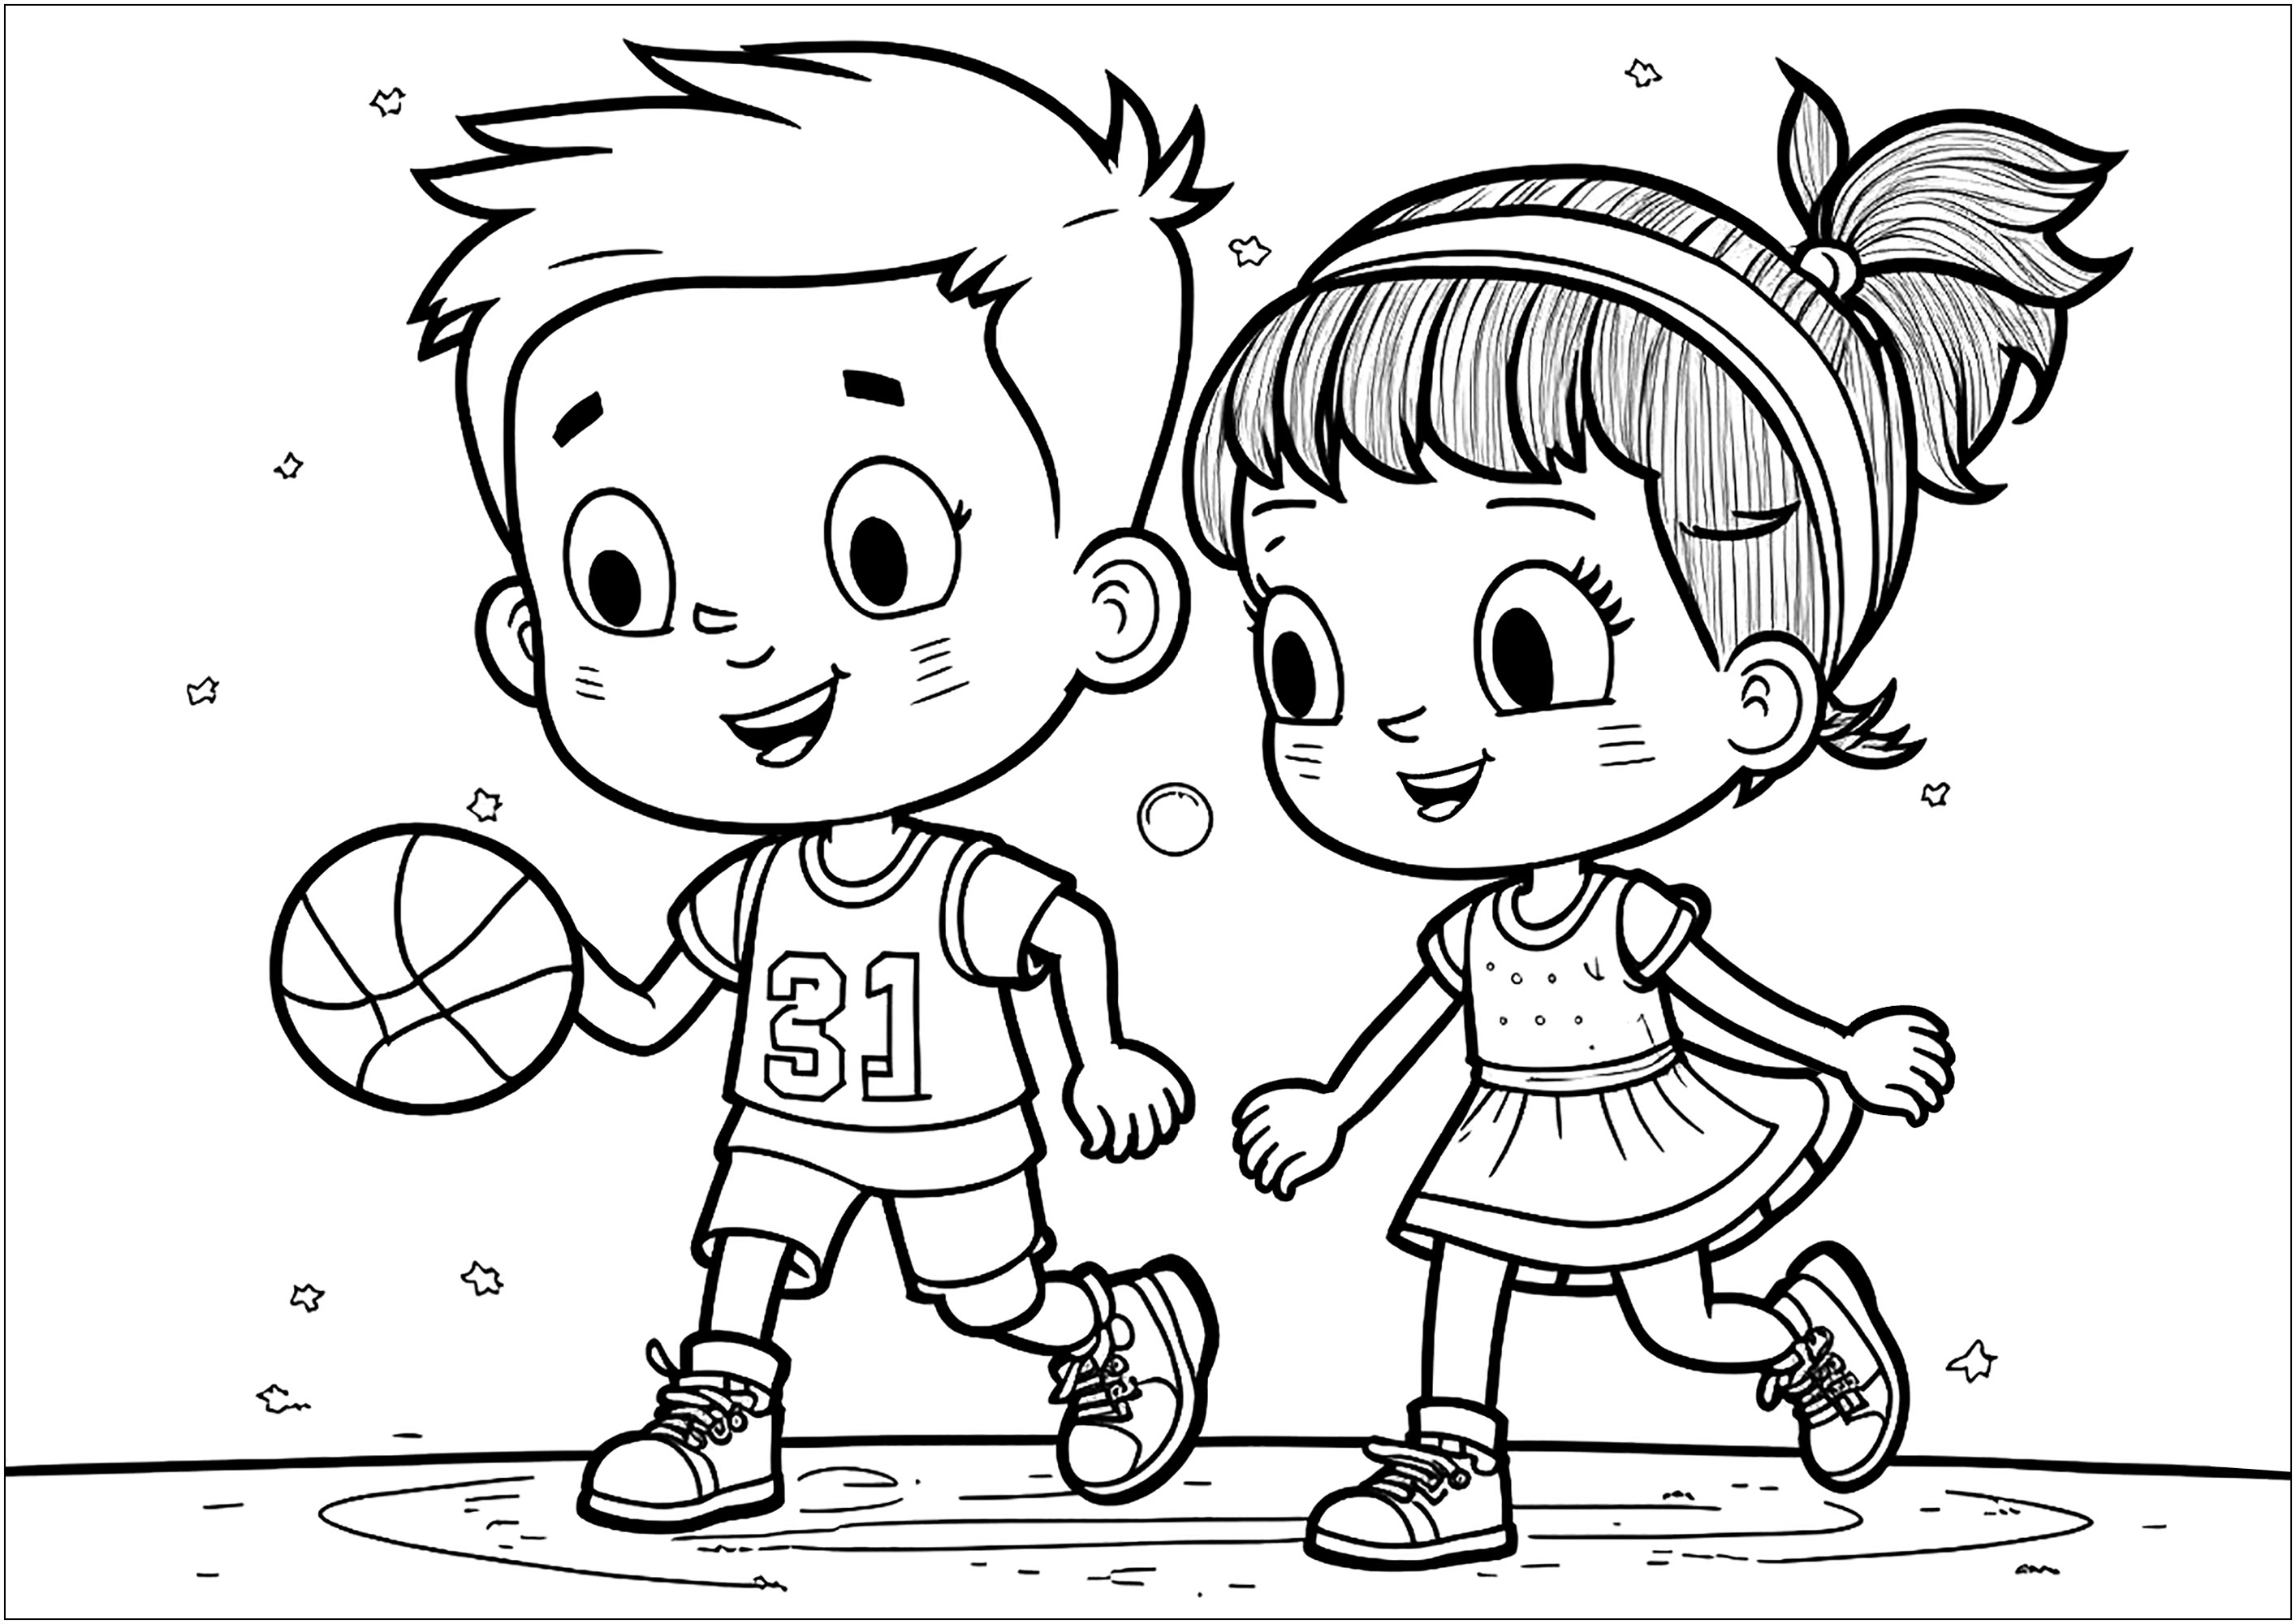 A boy and a girl playing basketball together. The two children are smiling and are dressed in sportswear that will have to be colored